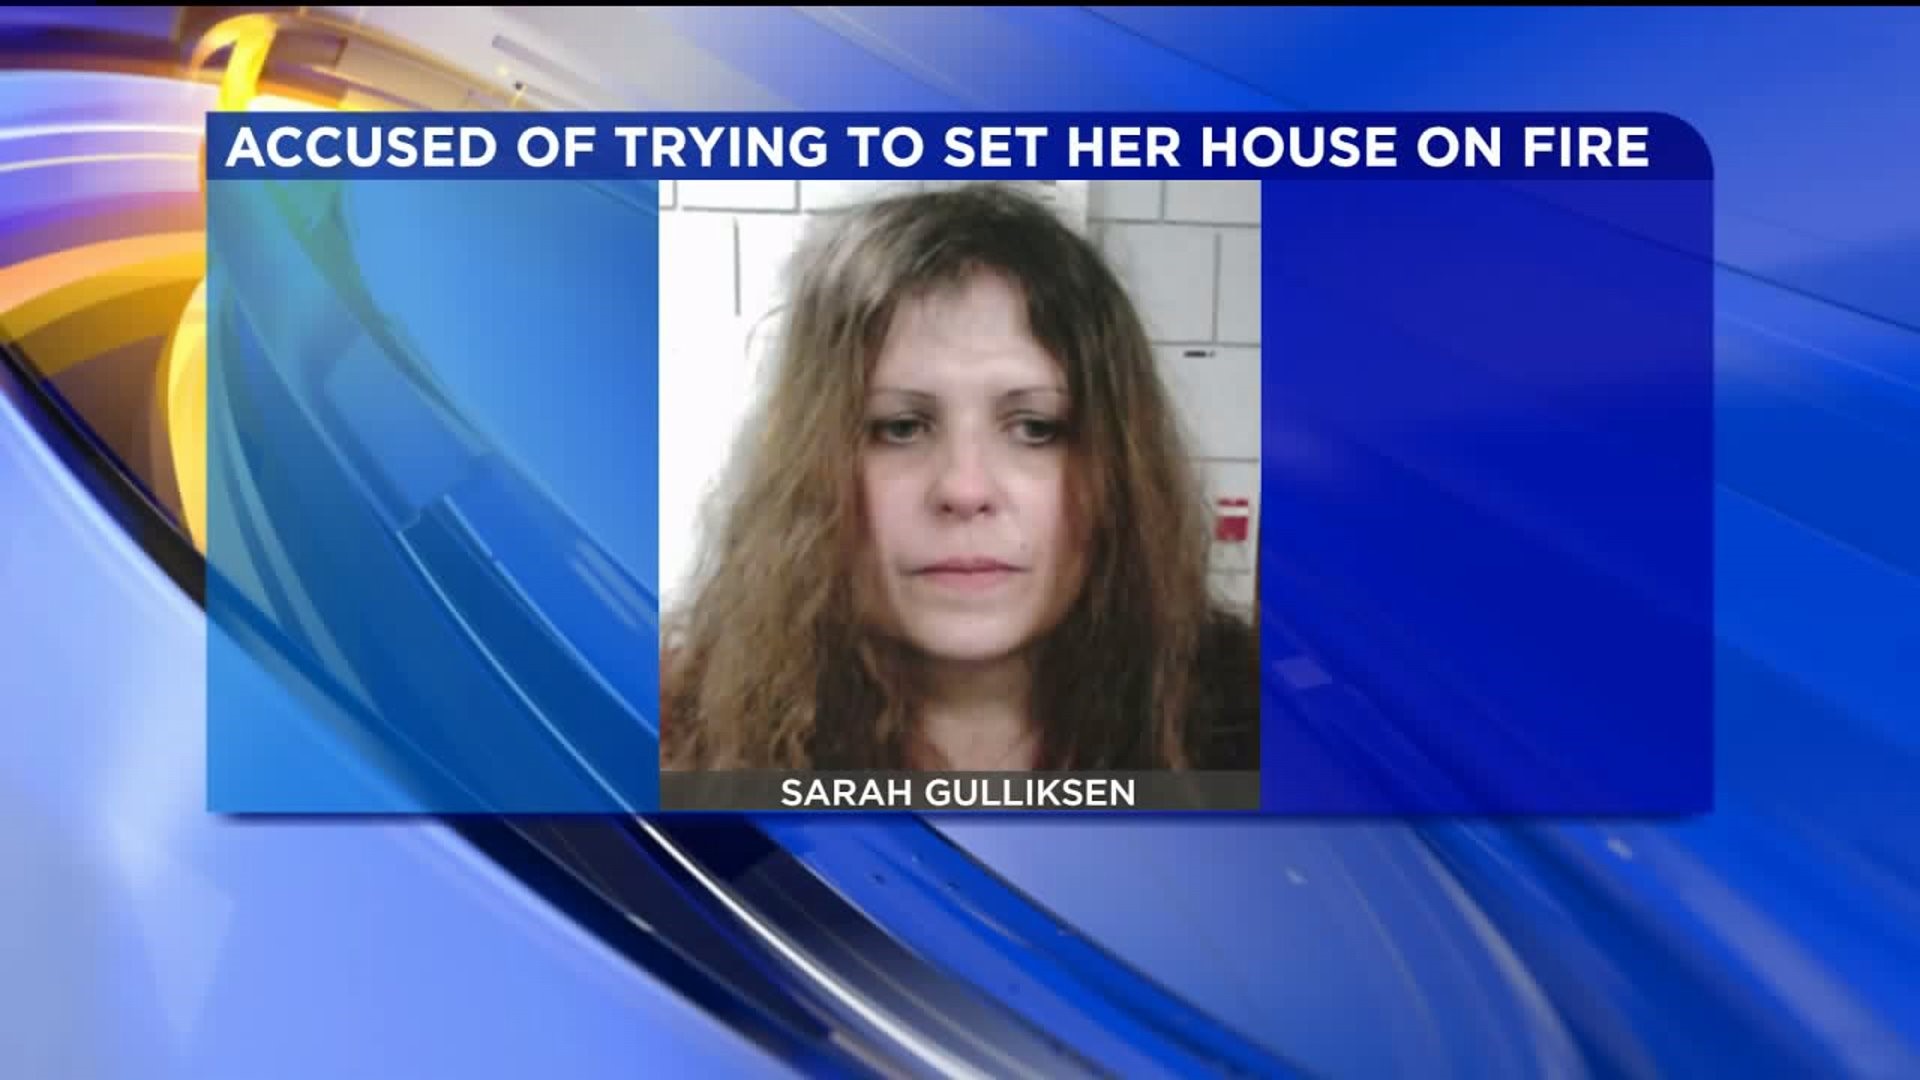 Woman Accused of Trying to Set Home on Fire